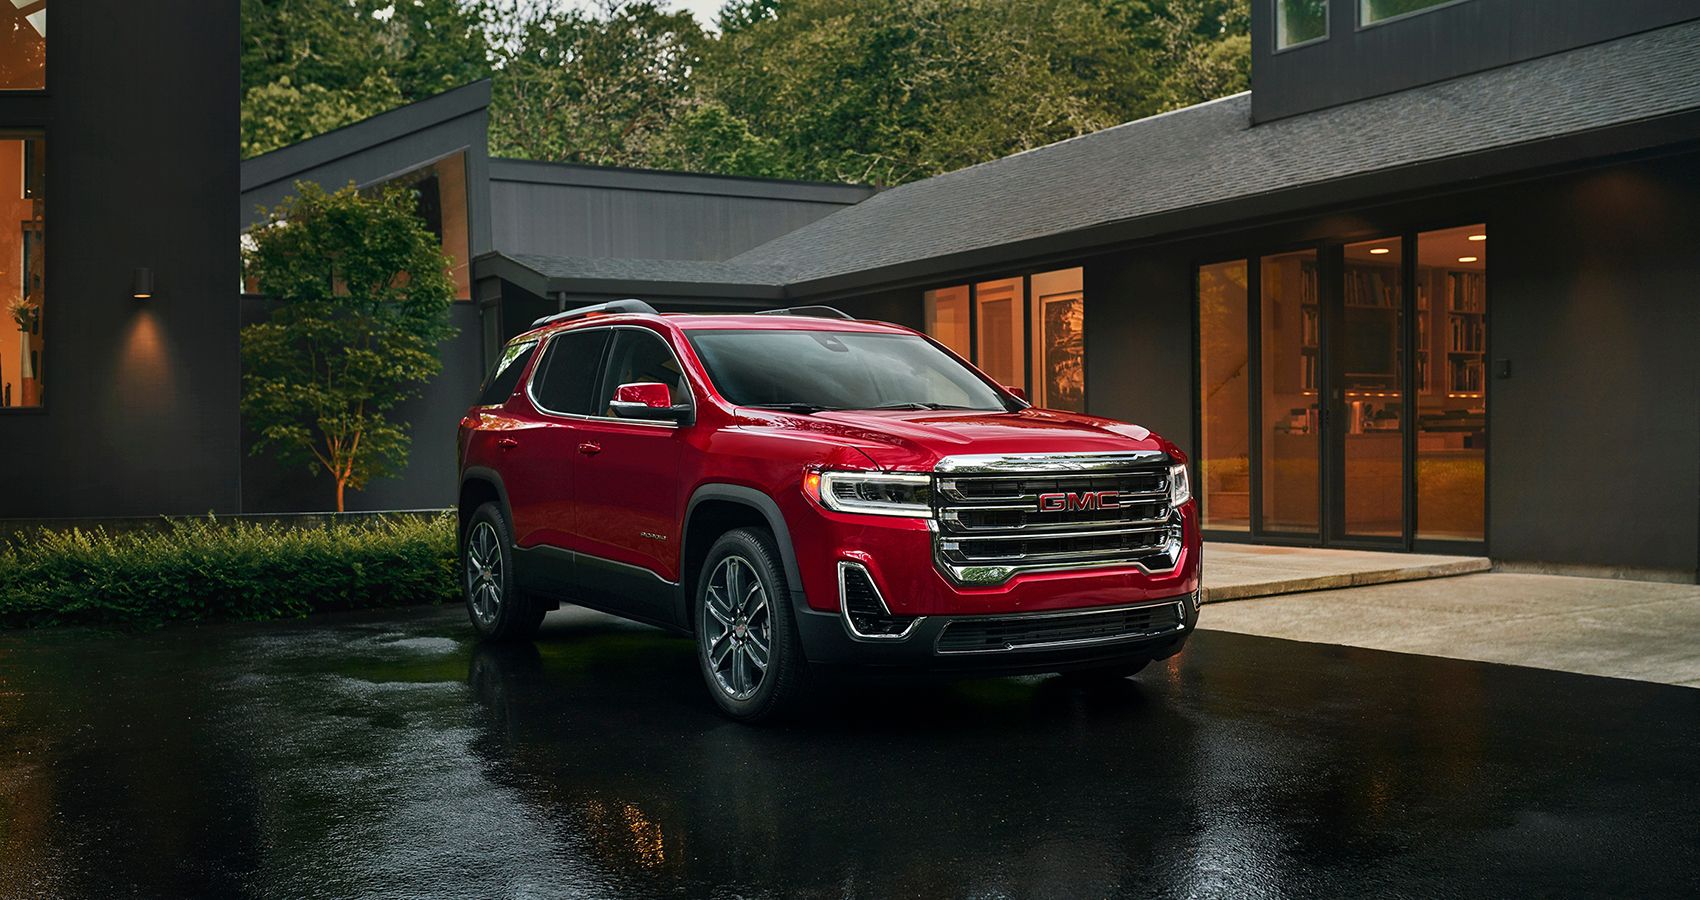 2022 GMC Acadia In Red Front View